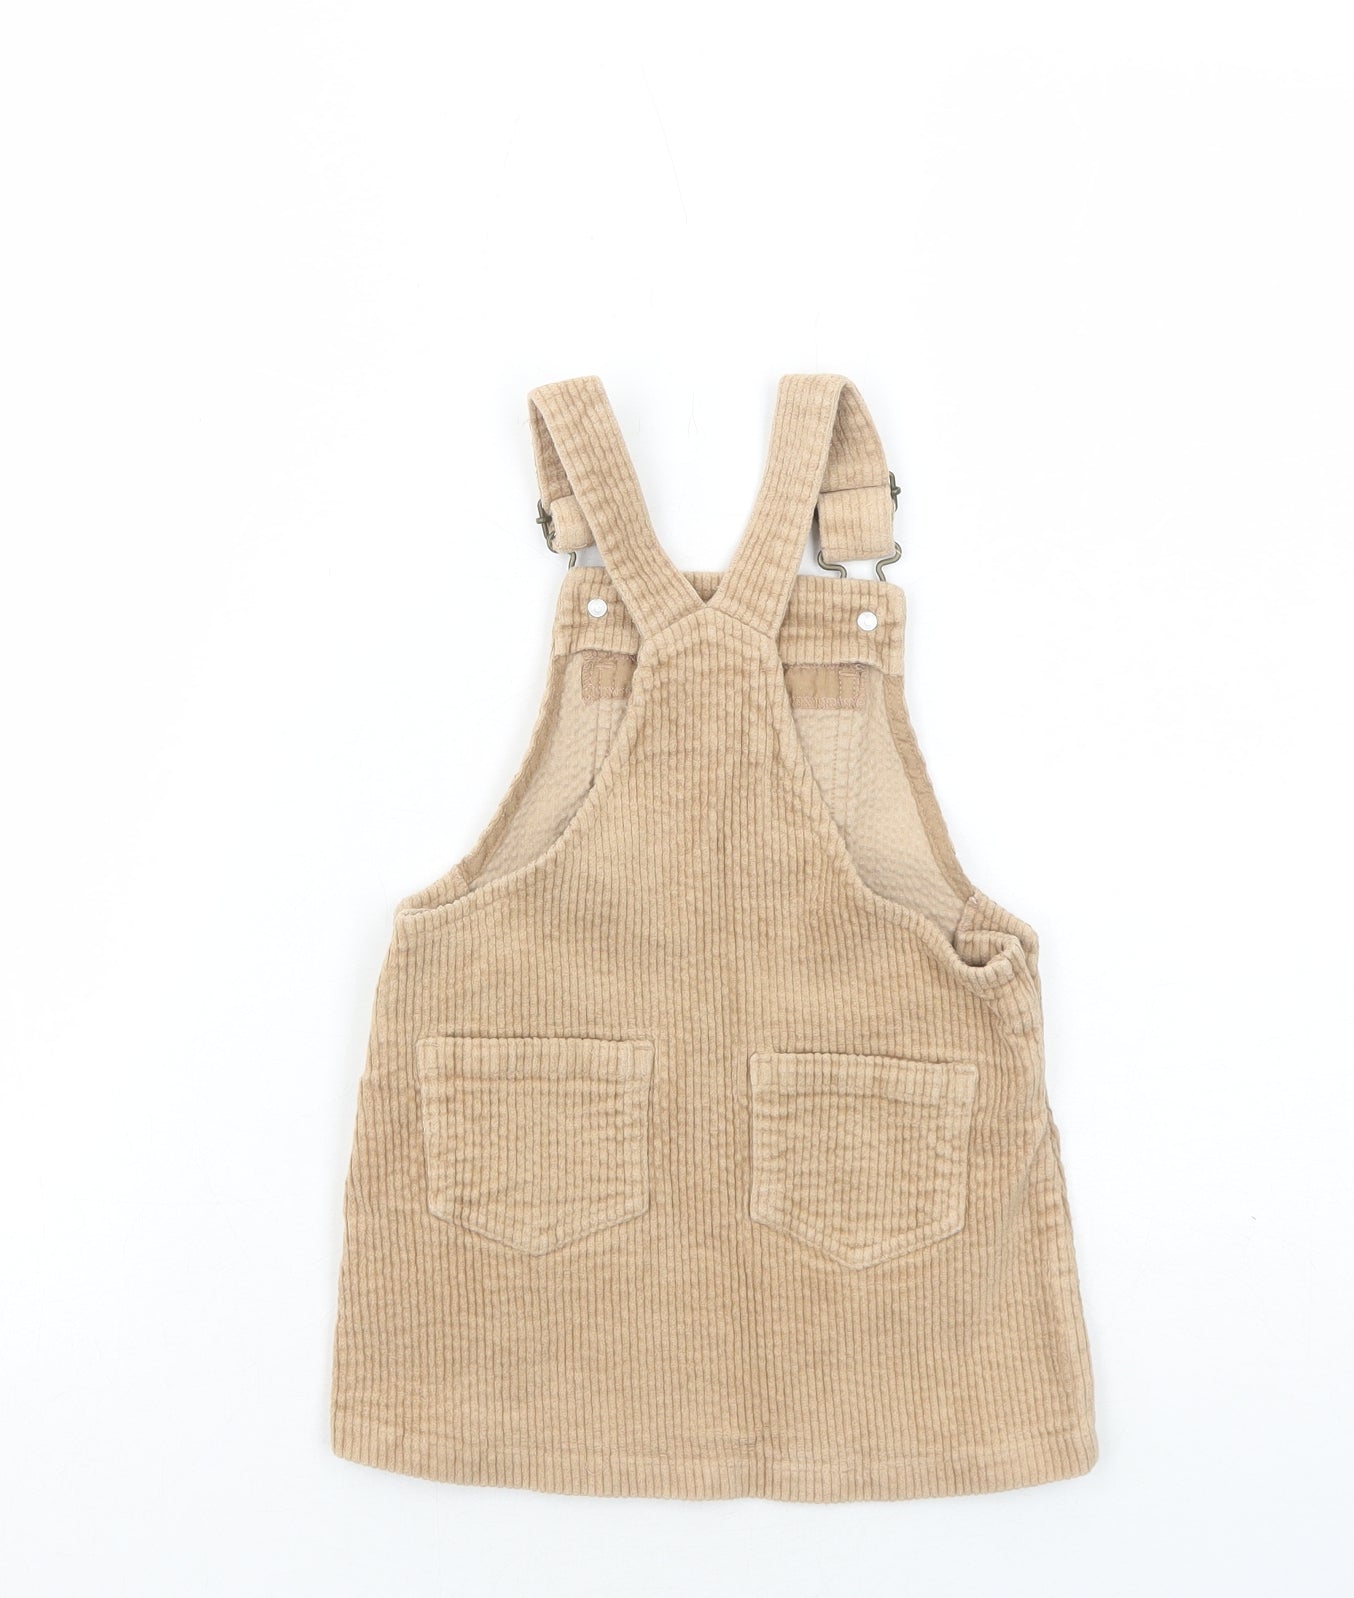 NEXT Girls Brown Cotton Pinafore/Dungaree Dress Size 18-24 Months Square Neck Buckle